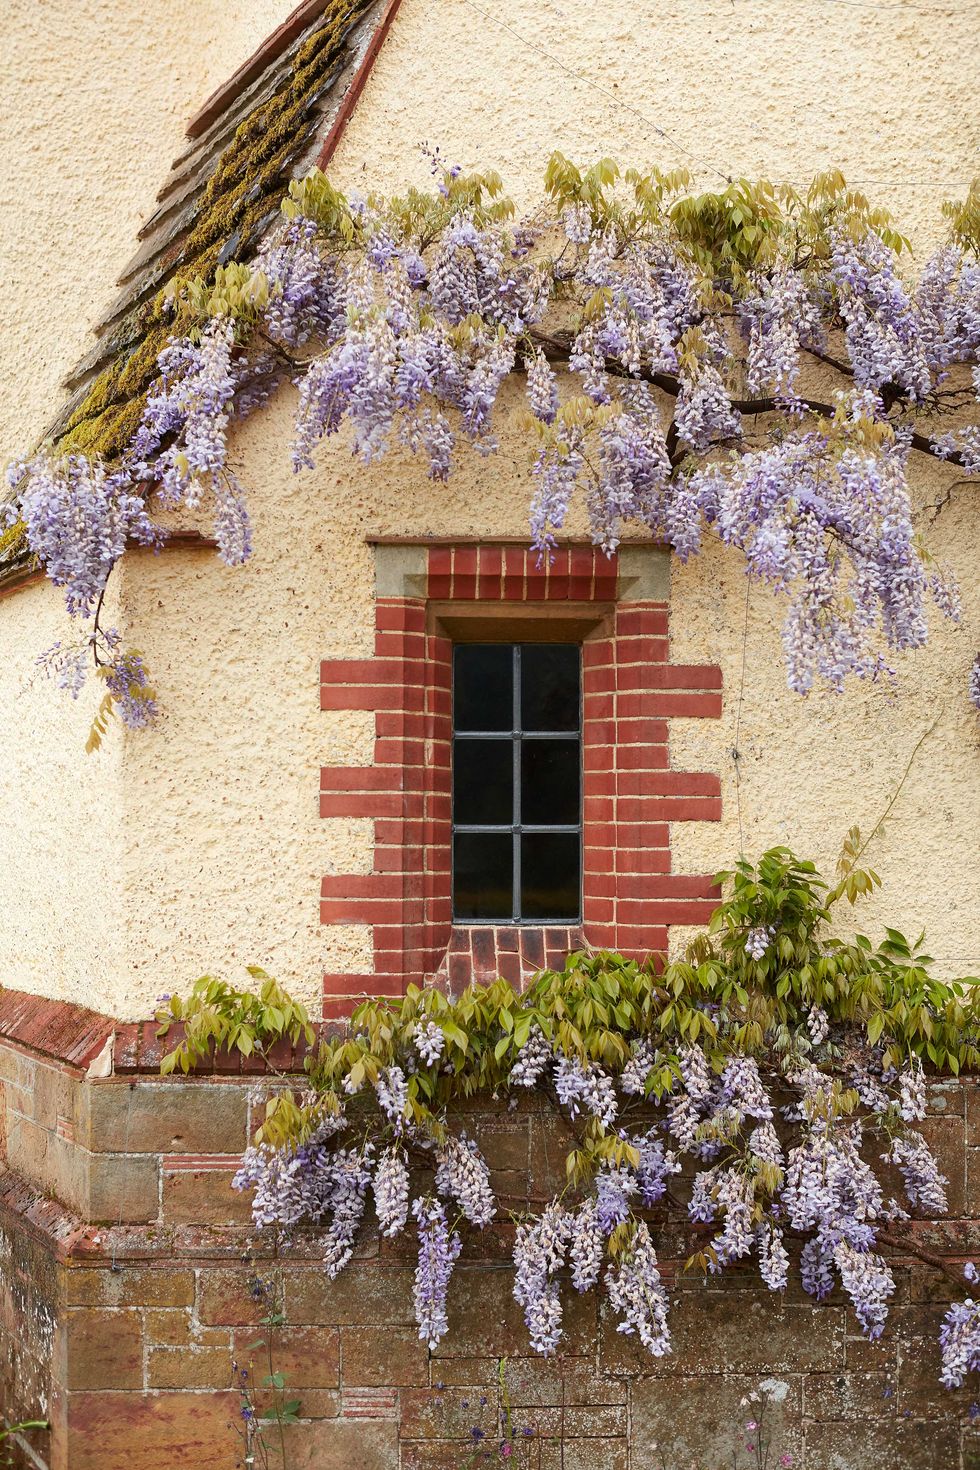 Wall, Window, House, Flower, Facade, Plant, Architecture, Spring, Building, Wisteria, 